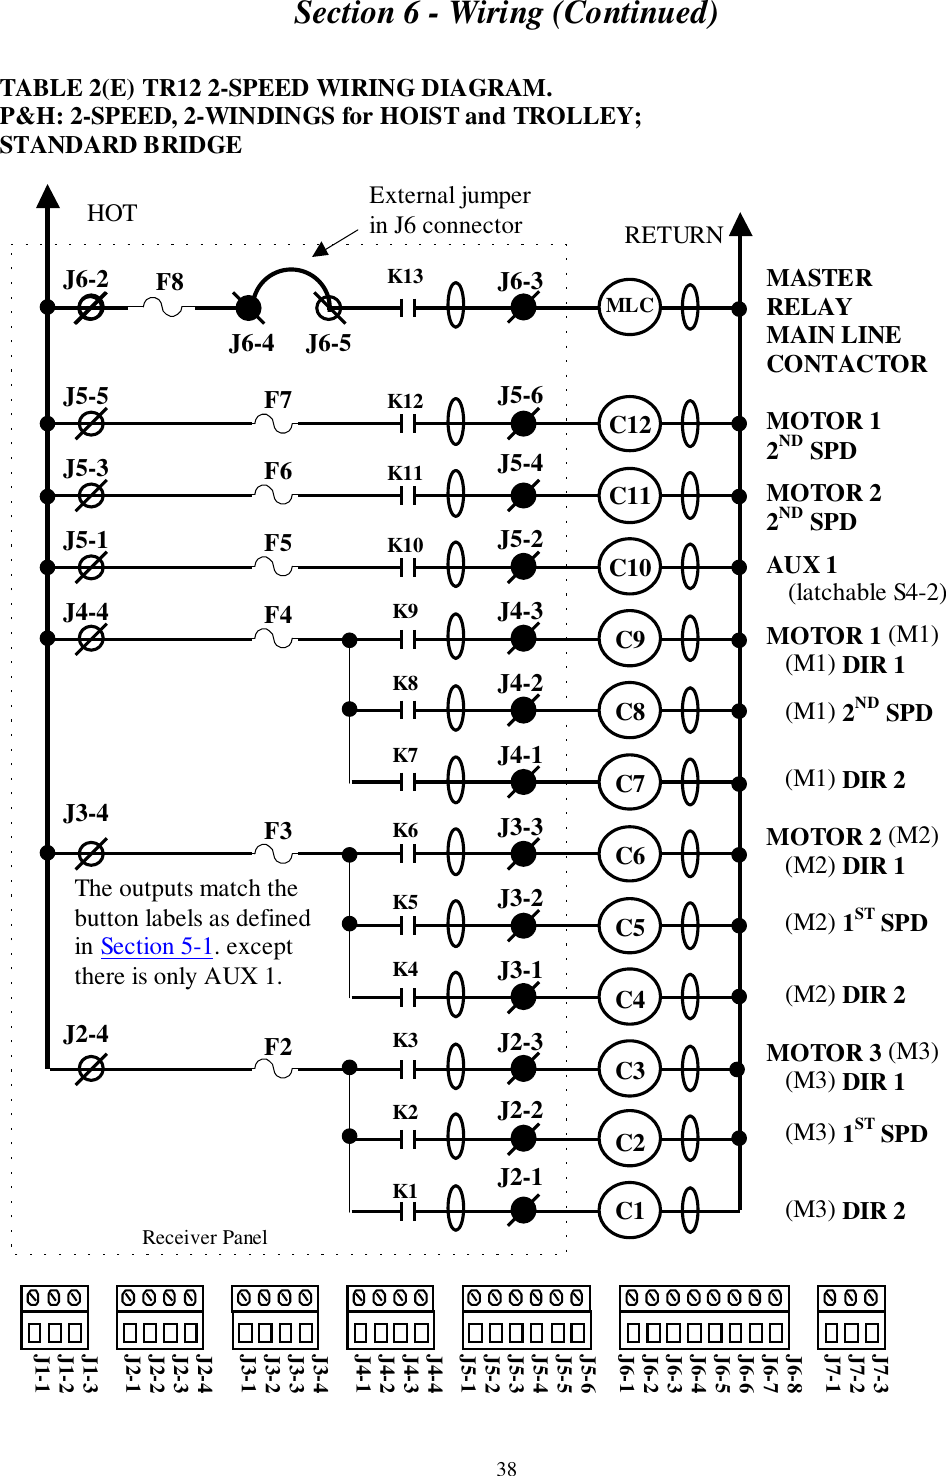 Section 6 - Wiring (Continued)38TABLE 2(E) TR12 2-SPEED WIRING DIAGRAM.P&amp;H: 2-SPEED, 2-WINDINGS for HOIST and TROLLEY;STANDARD BRIDGEMASTERRELAYMAIN LINECONTACTORMOTOR 12ND SPDMOTOR 22ND SPDAUX 1    (latchable S4-2)MOTOR 1 (M1)   (M1) DIR 1   (M1) 2ND SPD   (M1) DIR 2MOTOR 2 (M2)   (M2) DIR 1   (M2) 1ST SPD   (M2) DIR 2MOTOR 3 (M3)   (M3) DIR 1   (M3) 1ST SPD   (M3) DIR 2     Receiver PanelJ6-2J5-5J5-3J5-1J4-4J3-4J2-4J6-3J5-6J5-4J5-2J4-3J4-2J4-1J3-3J3-2J3-1J2-3J2-2J2-1HOT RETURNK13K12K11K10K9K8K7K6K5K4K3K2K1MLCC12C11C10C9C8C7C6C5C4C3C2C1F7F6F5F4F3F2J7-3J7-2J7-1J6-8J6-7J6-6J6-5J6-4J6-3J6-2J6-1J5-6J5-5J5-4J5-3J5-2J5-1J4-4J4-3J4-2J4-1J3-4J3-3J3-2J3-1J2-4J2-3J2-2J2-1J1-3J1-2J1-1External jumperin J6 connectorJ6-4     J6-5F8The outputs match thebutton labels as definedin Section 5-1. exceptthere is only AUX 1.